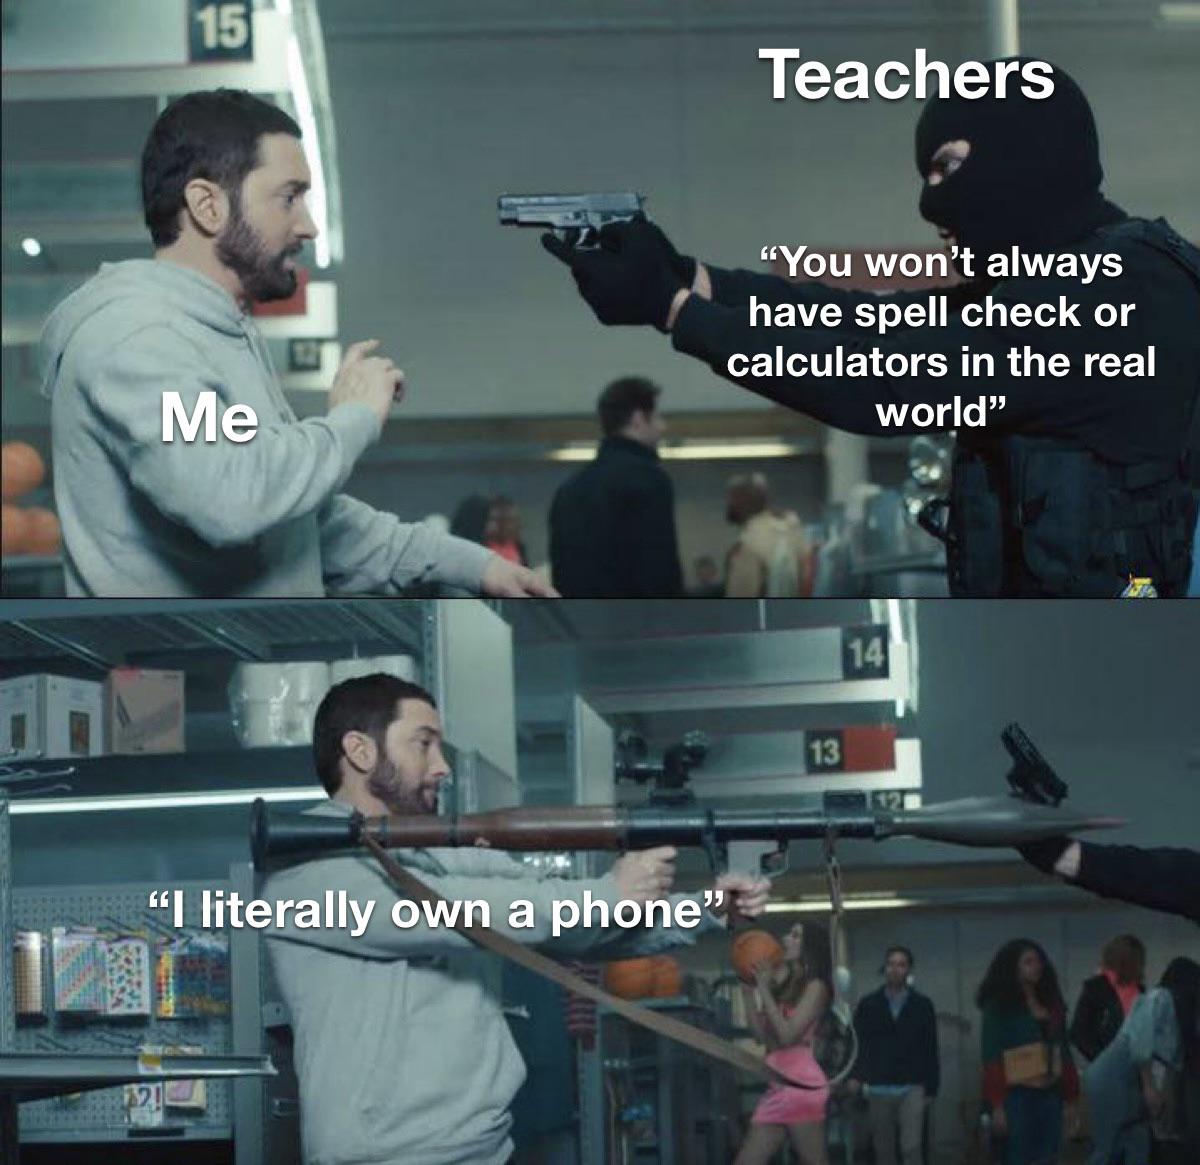 funny memes - dank memes - dbd memes - 15 Teachers "You won't always have spell check or calculators in the real world Me 14 13 "I literally own a phone" Ka Wi